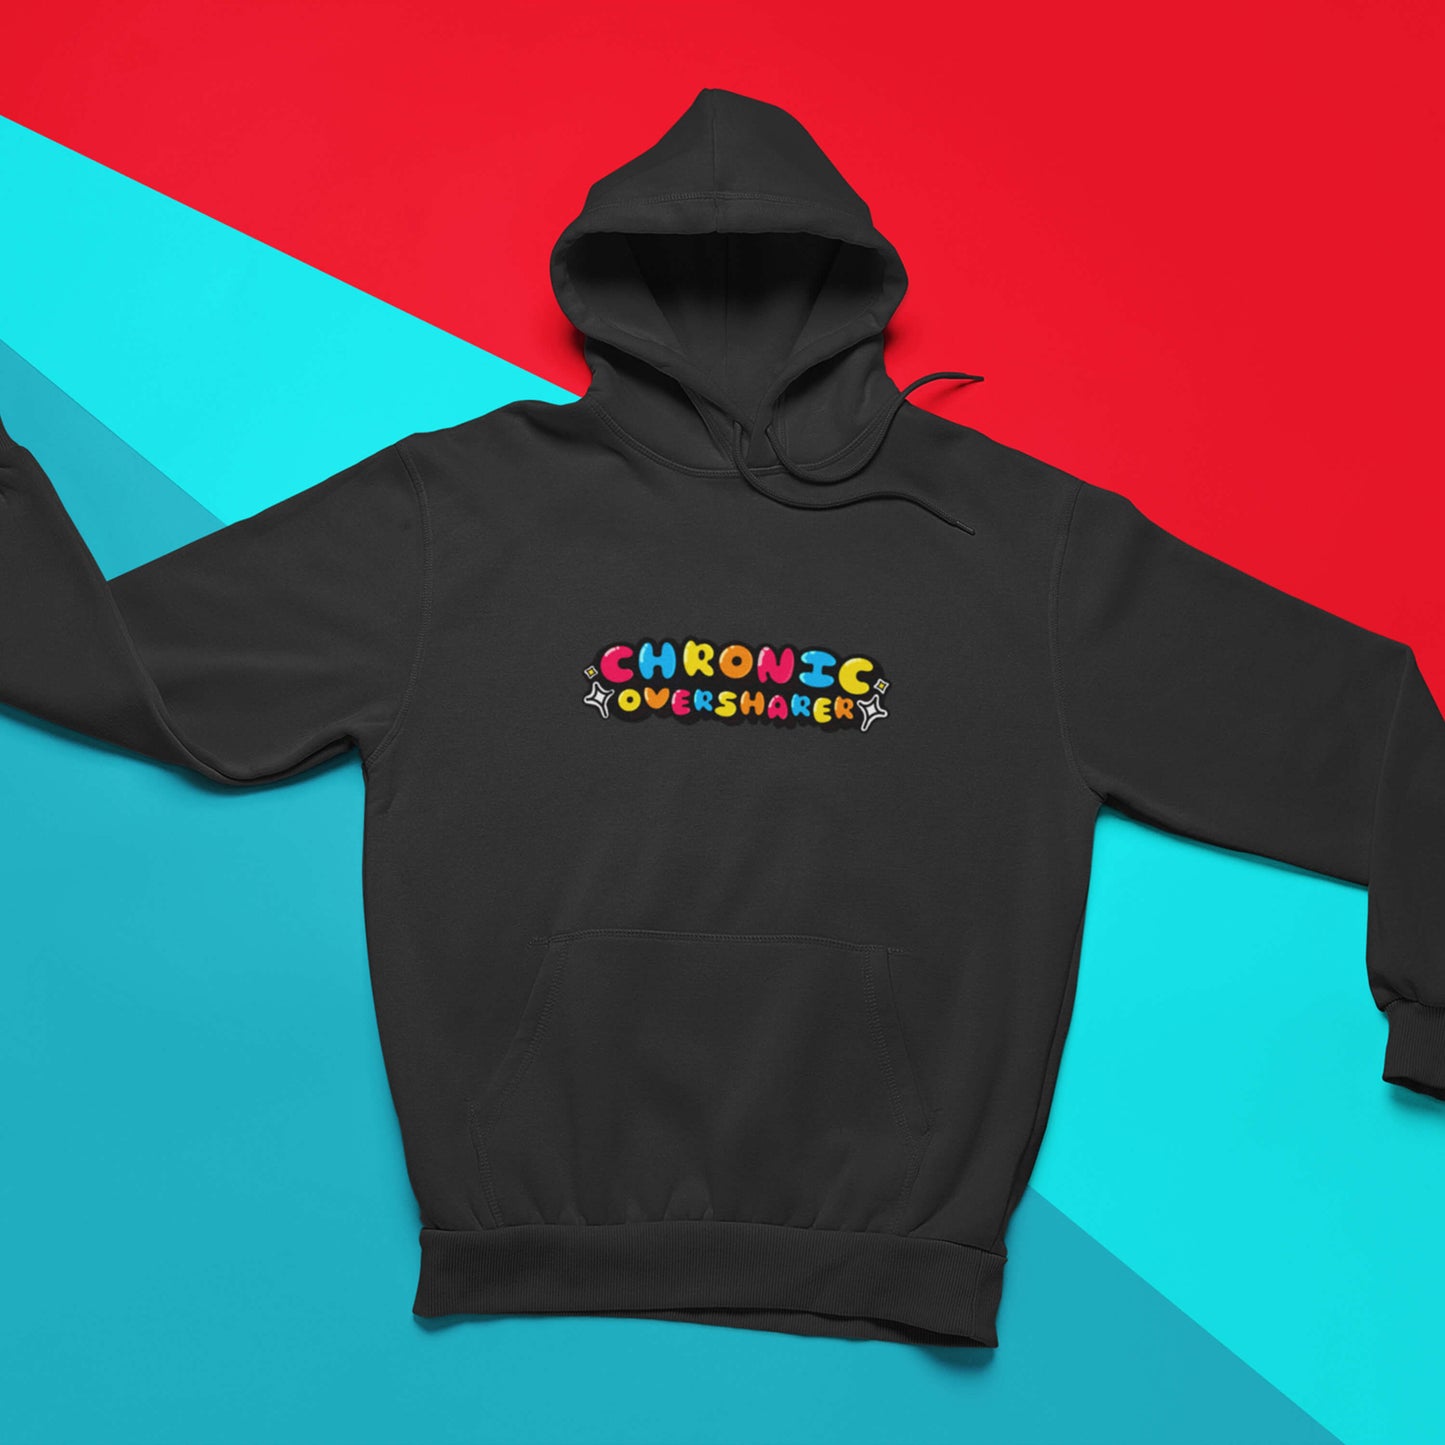 The Chronic Over Sharer Black Hoodie laying on a red and blue background. The black hoodie features a drawstring hood, a large front pocket and the text 'chronic oversharer' in rainbow bubble font with a black shadow effect and white sparkles. The design was created to raise awareness for neurodivergent disorders such as ADHD.